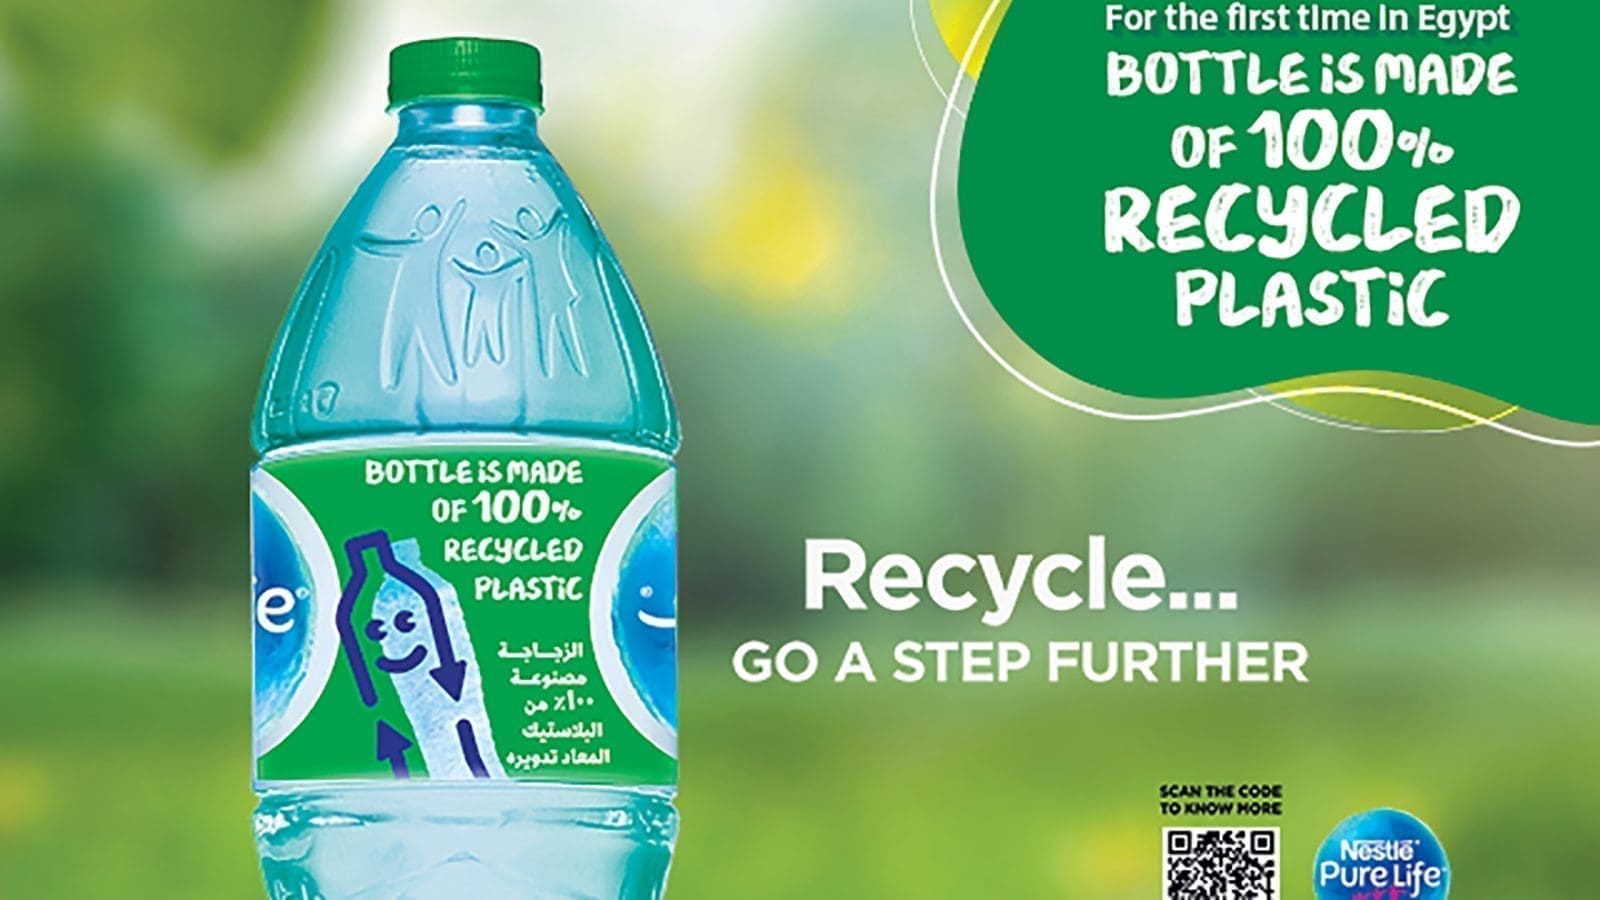 Nestlé Waters Egypt launches country’s first water bottle made of 100% recycled plastics